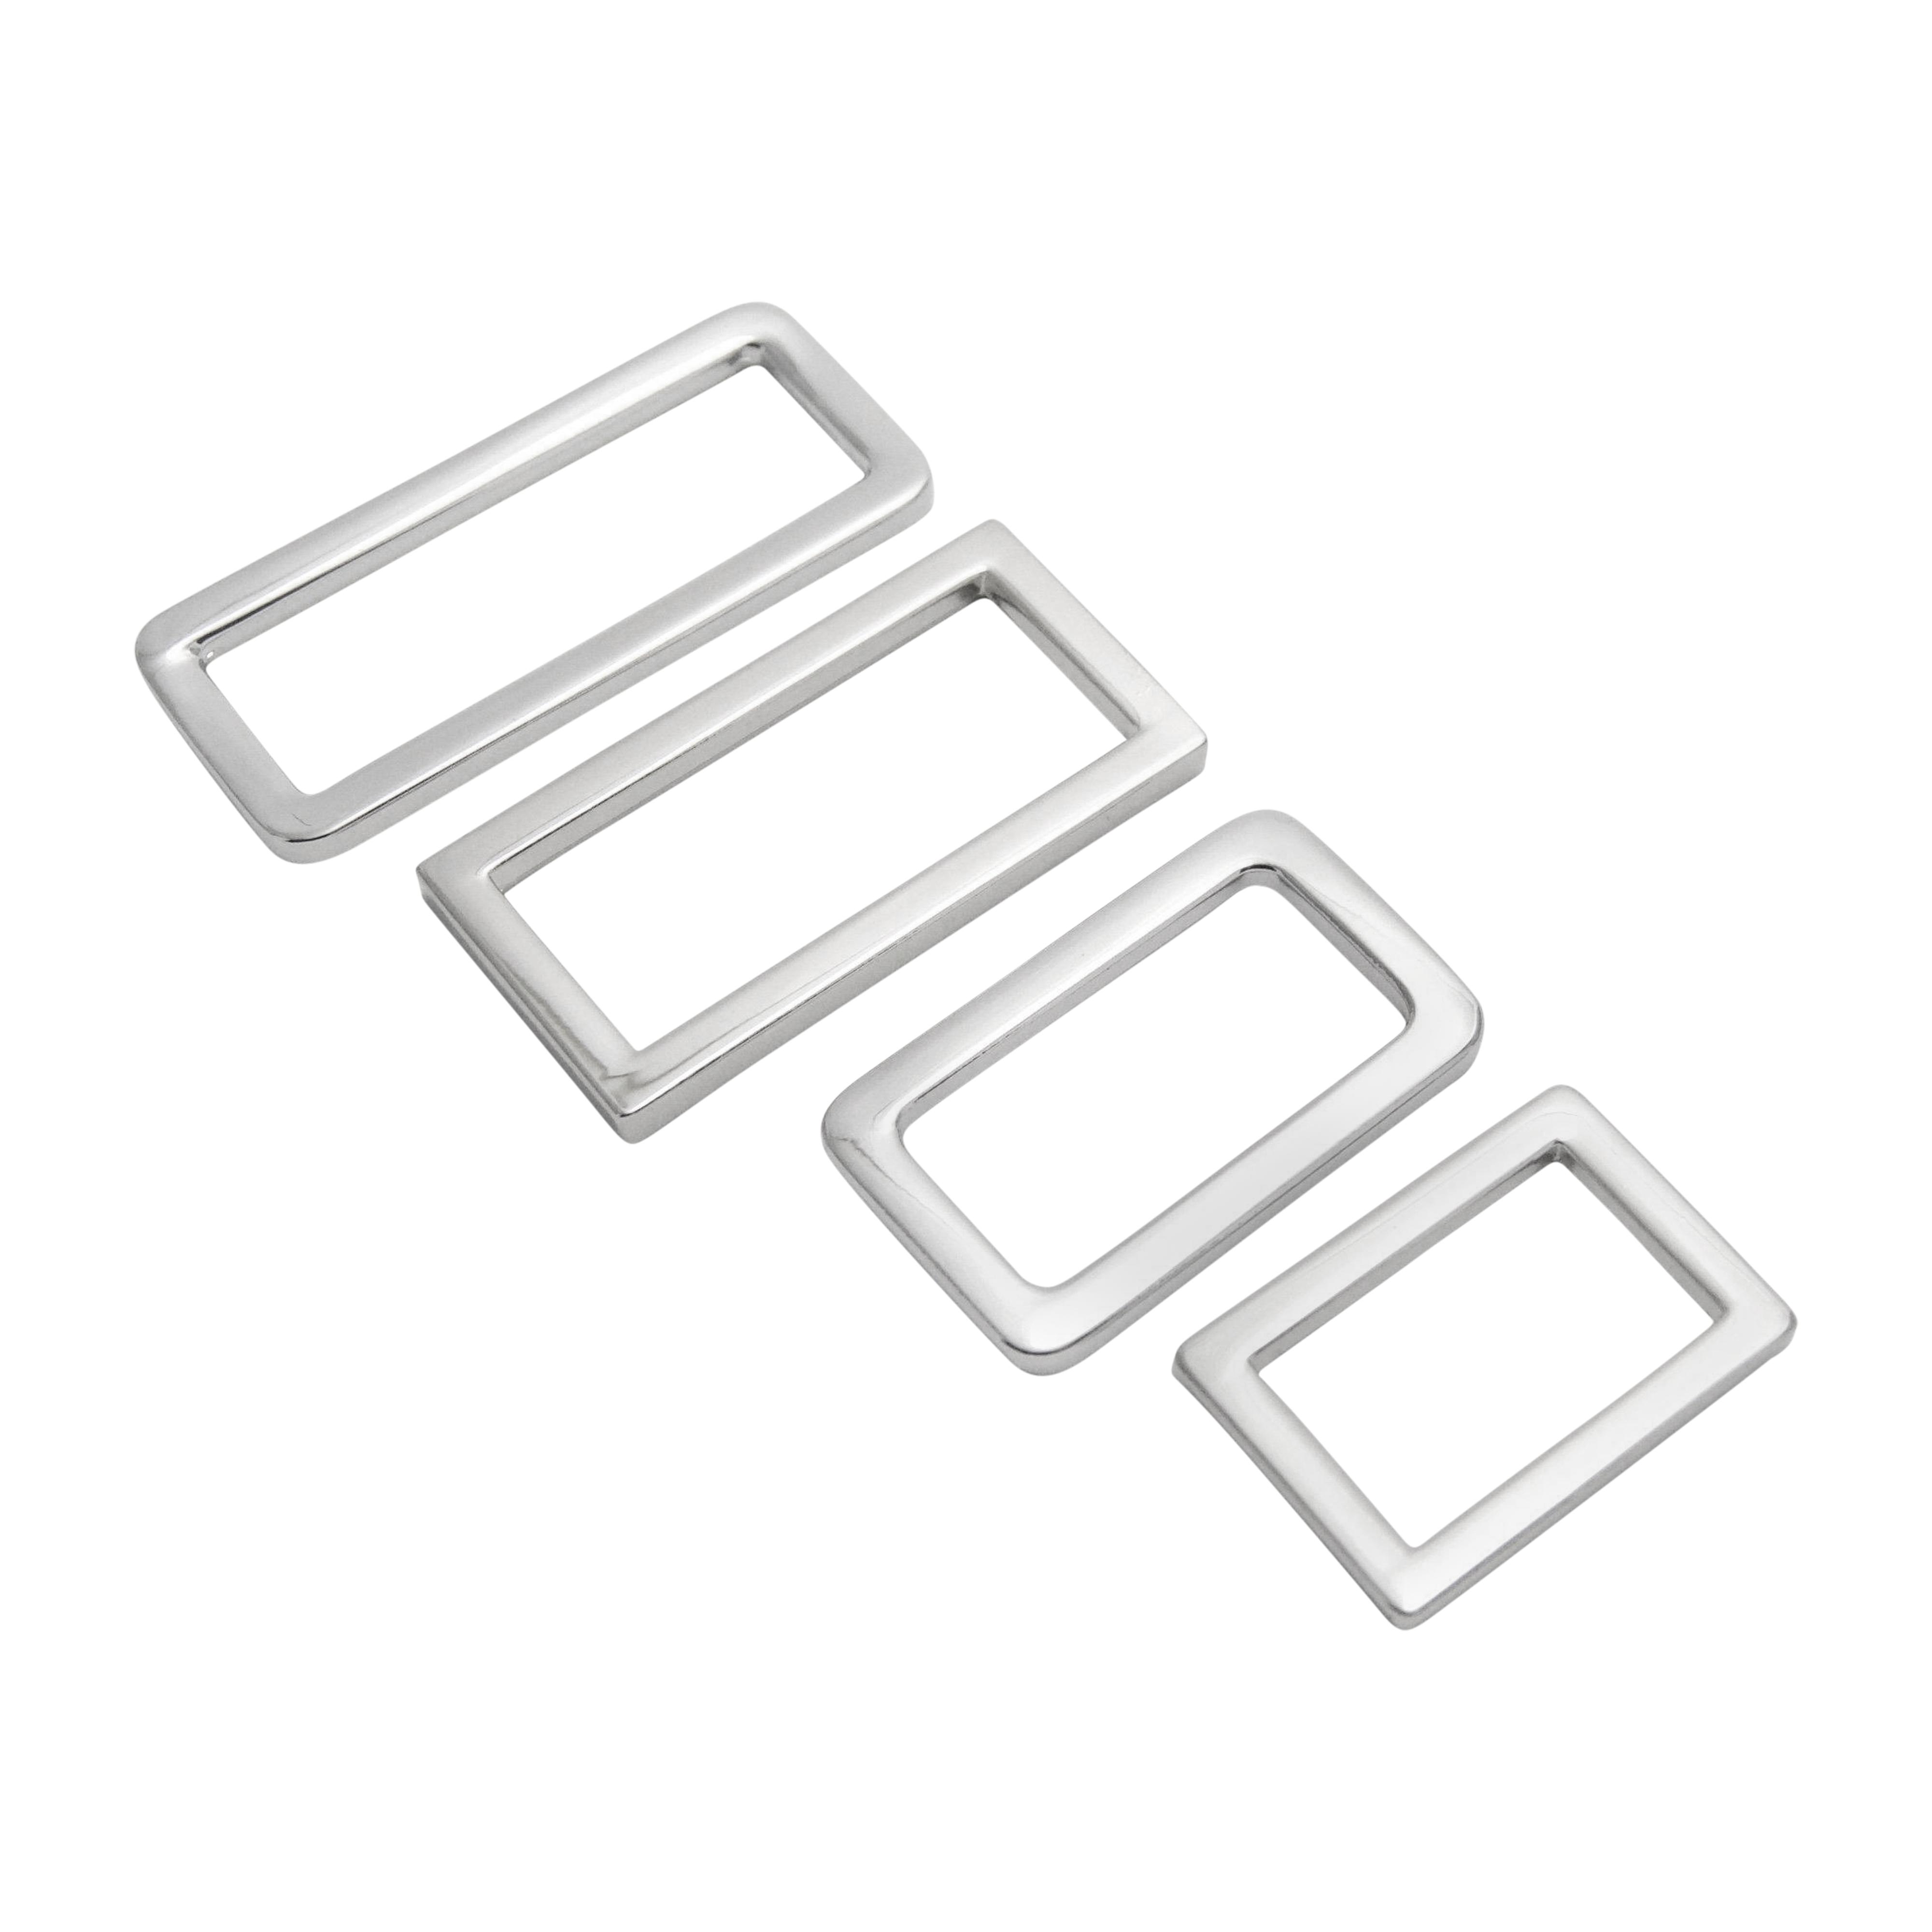 silver rectangle rings to make bag handle connectors, available in 3 sizes, 1", 1 1/4" and 1 1/2" wide